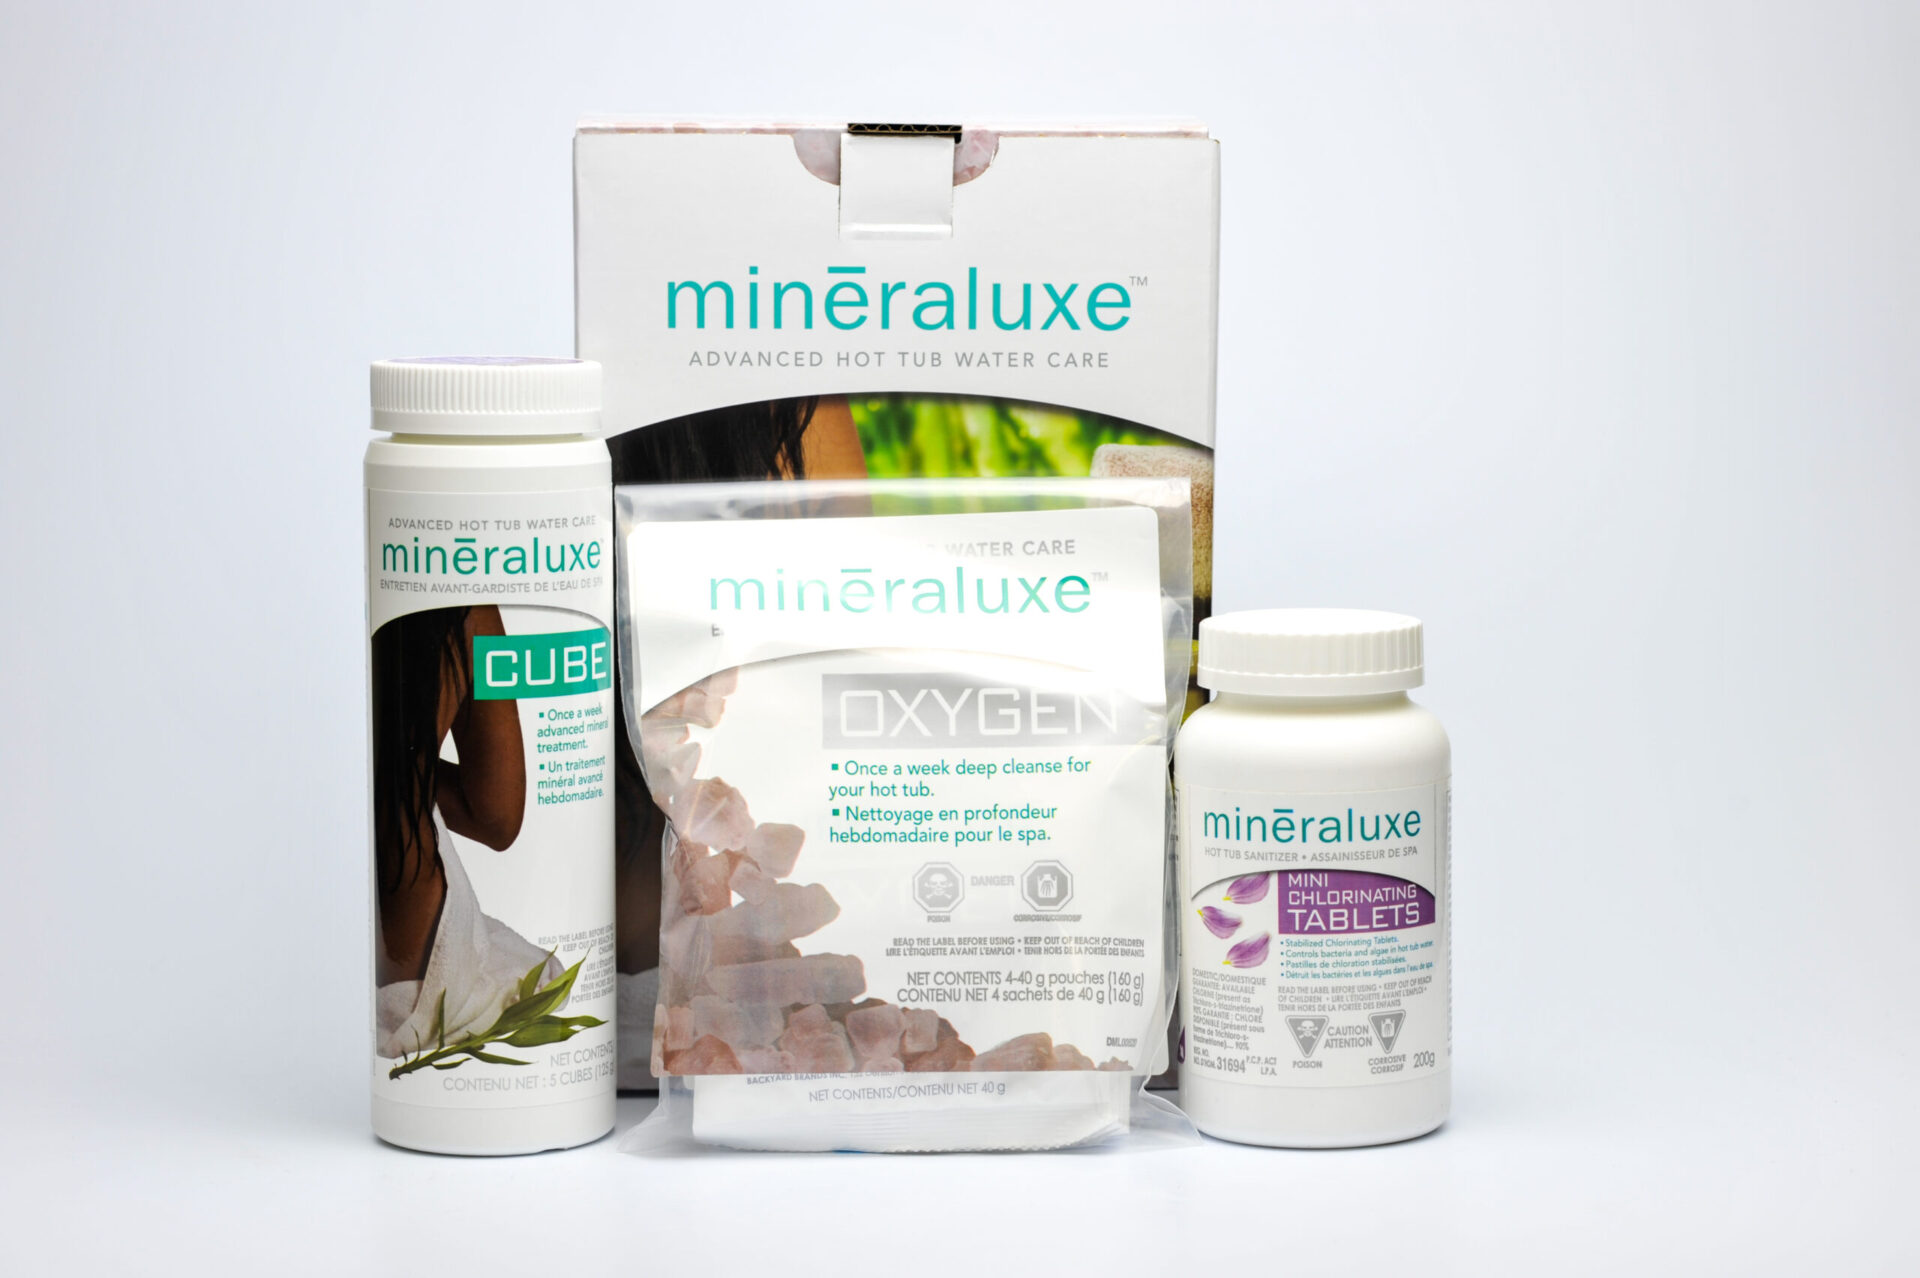 Mineraluxe One Month Chlorine Kit scaled - MINERALUXE 1 MONTH CHLORINE KIT